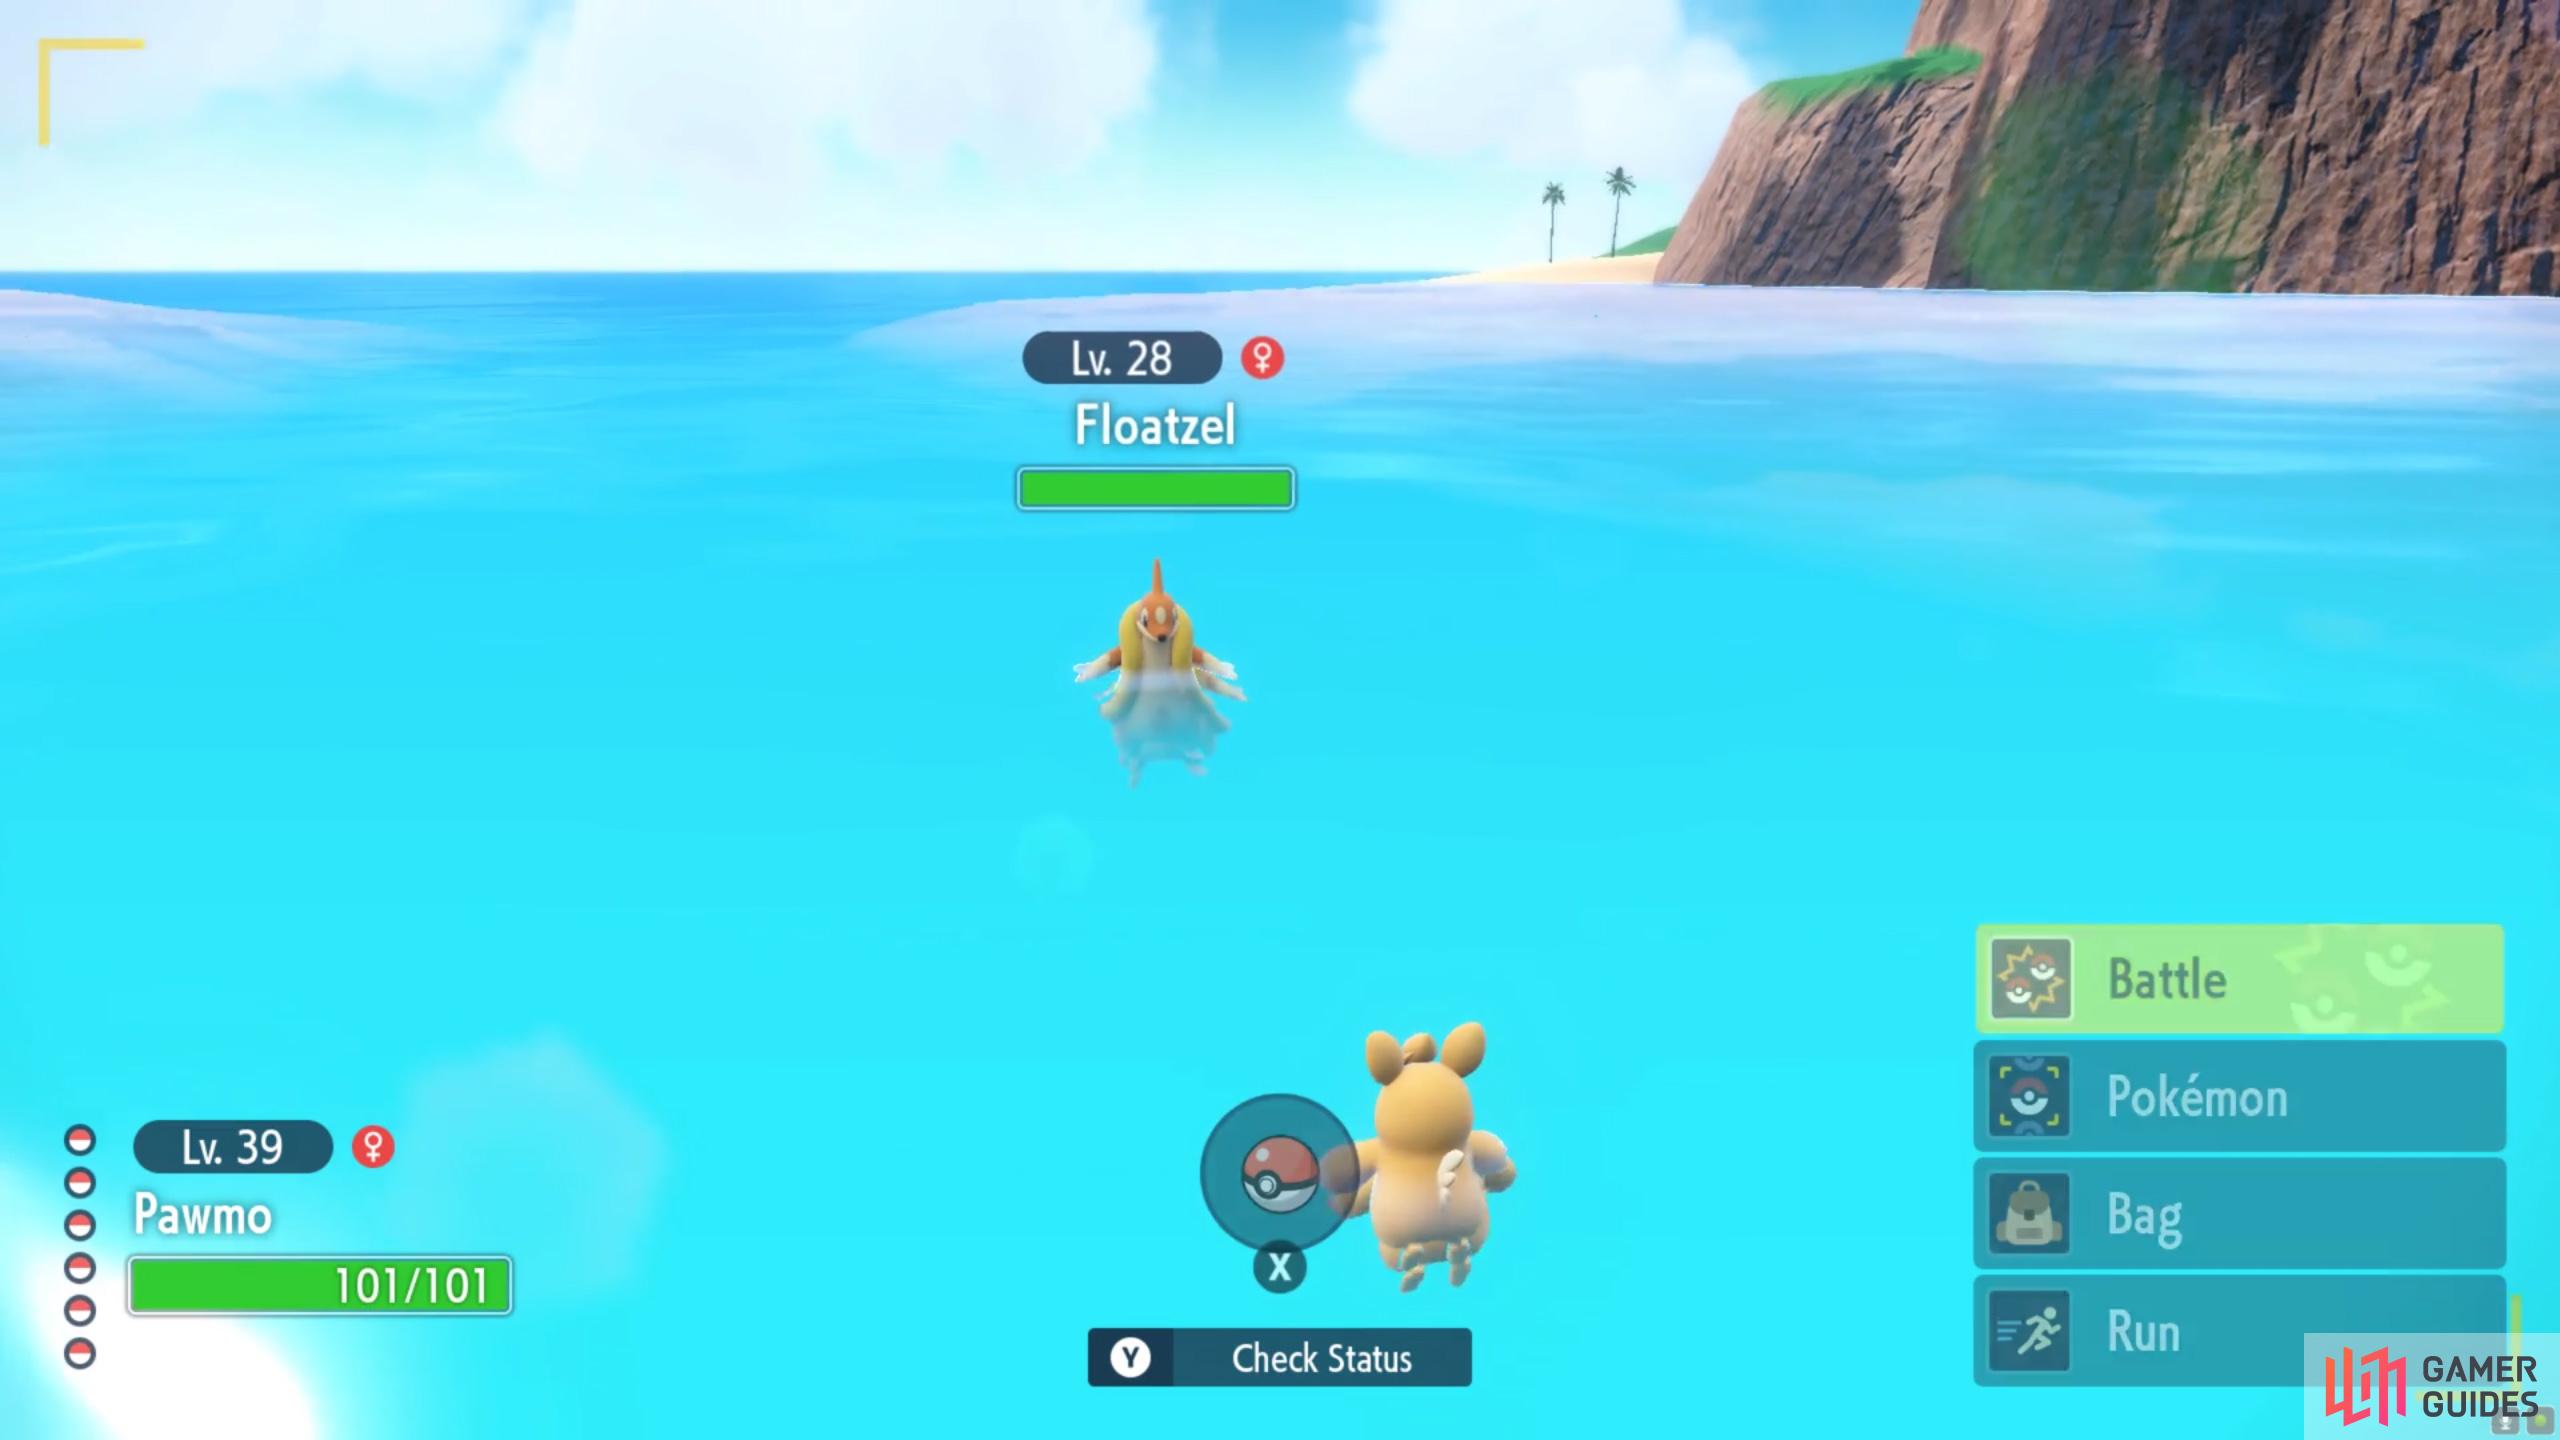 The Paldean sea has lots of Water-types too.